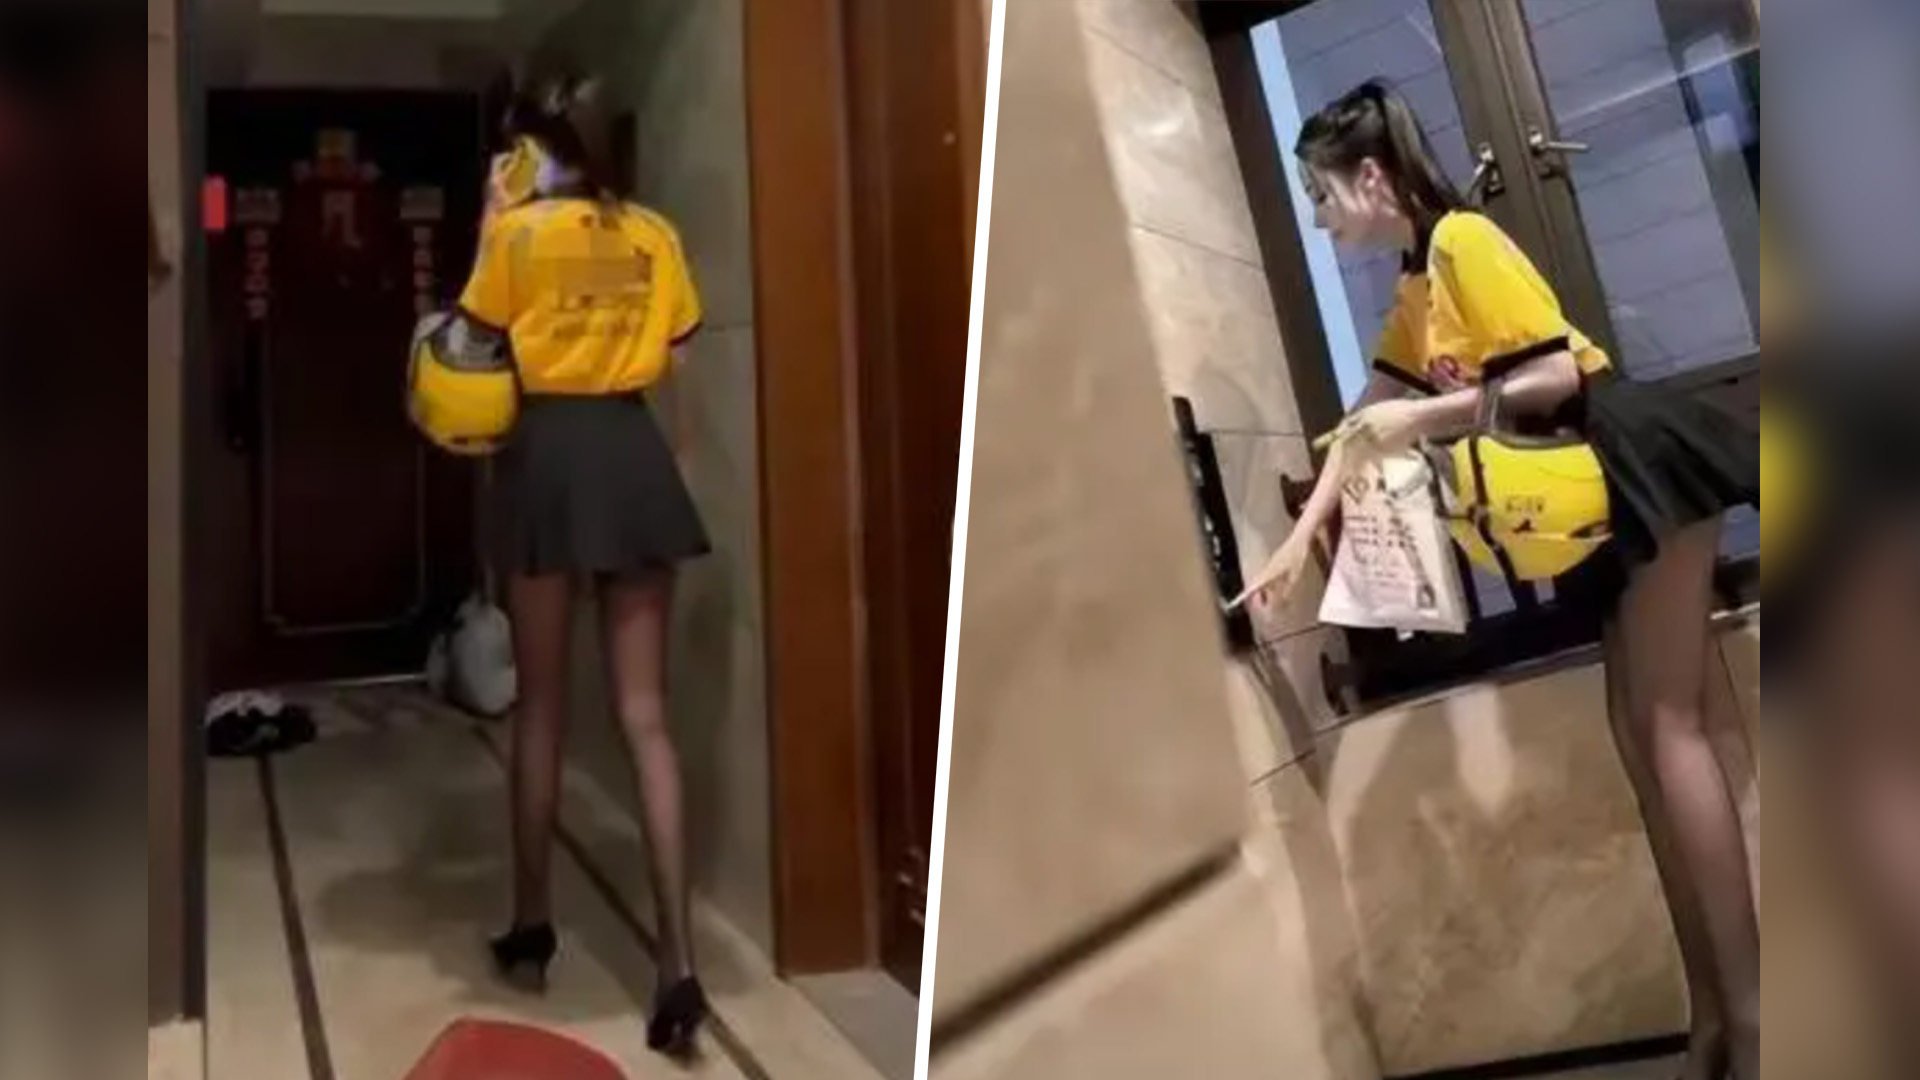 An online influencer in China has been forced to apologise over a stunt in which she dressed up in a short skirt and stockings to pose as a mainland food delivery worker. Photo: SCMP composite/QQ.com